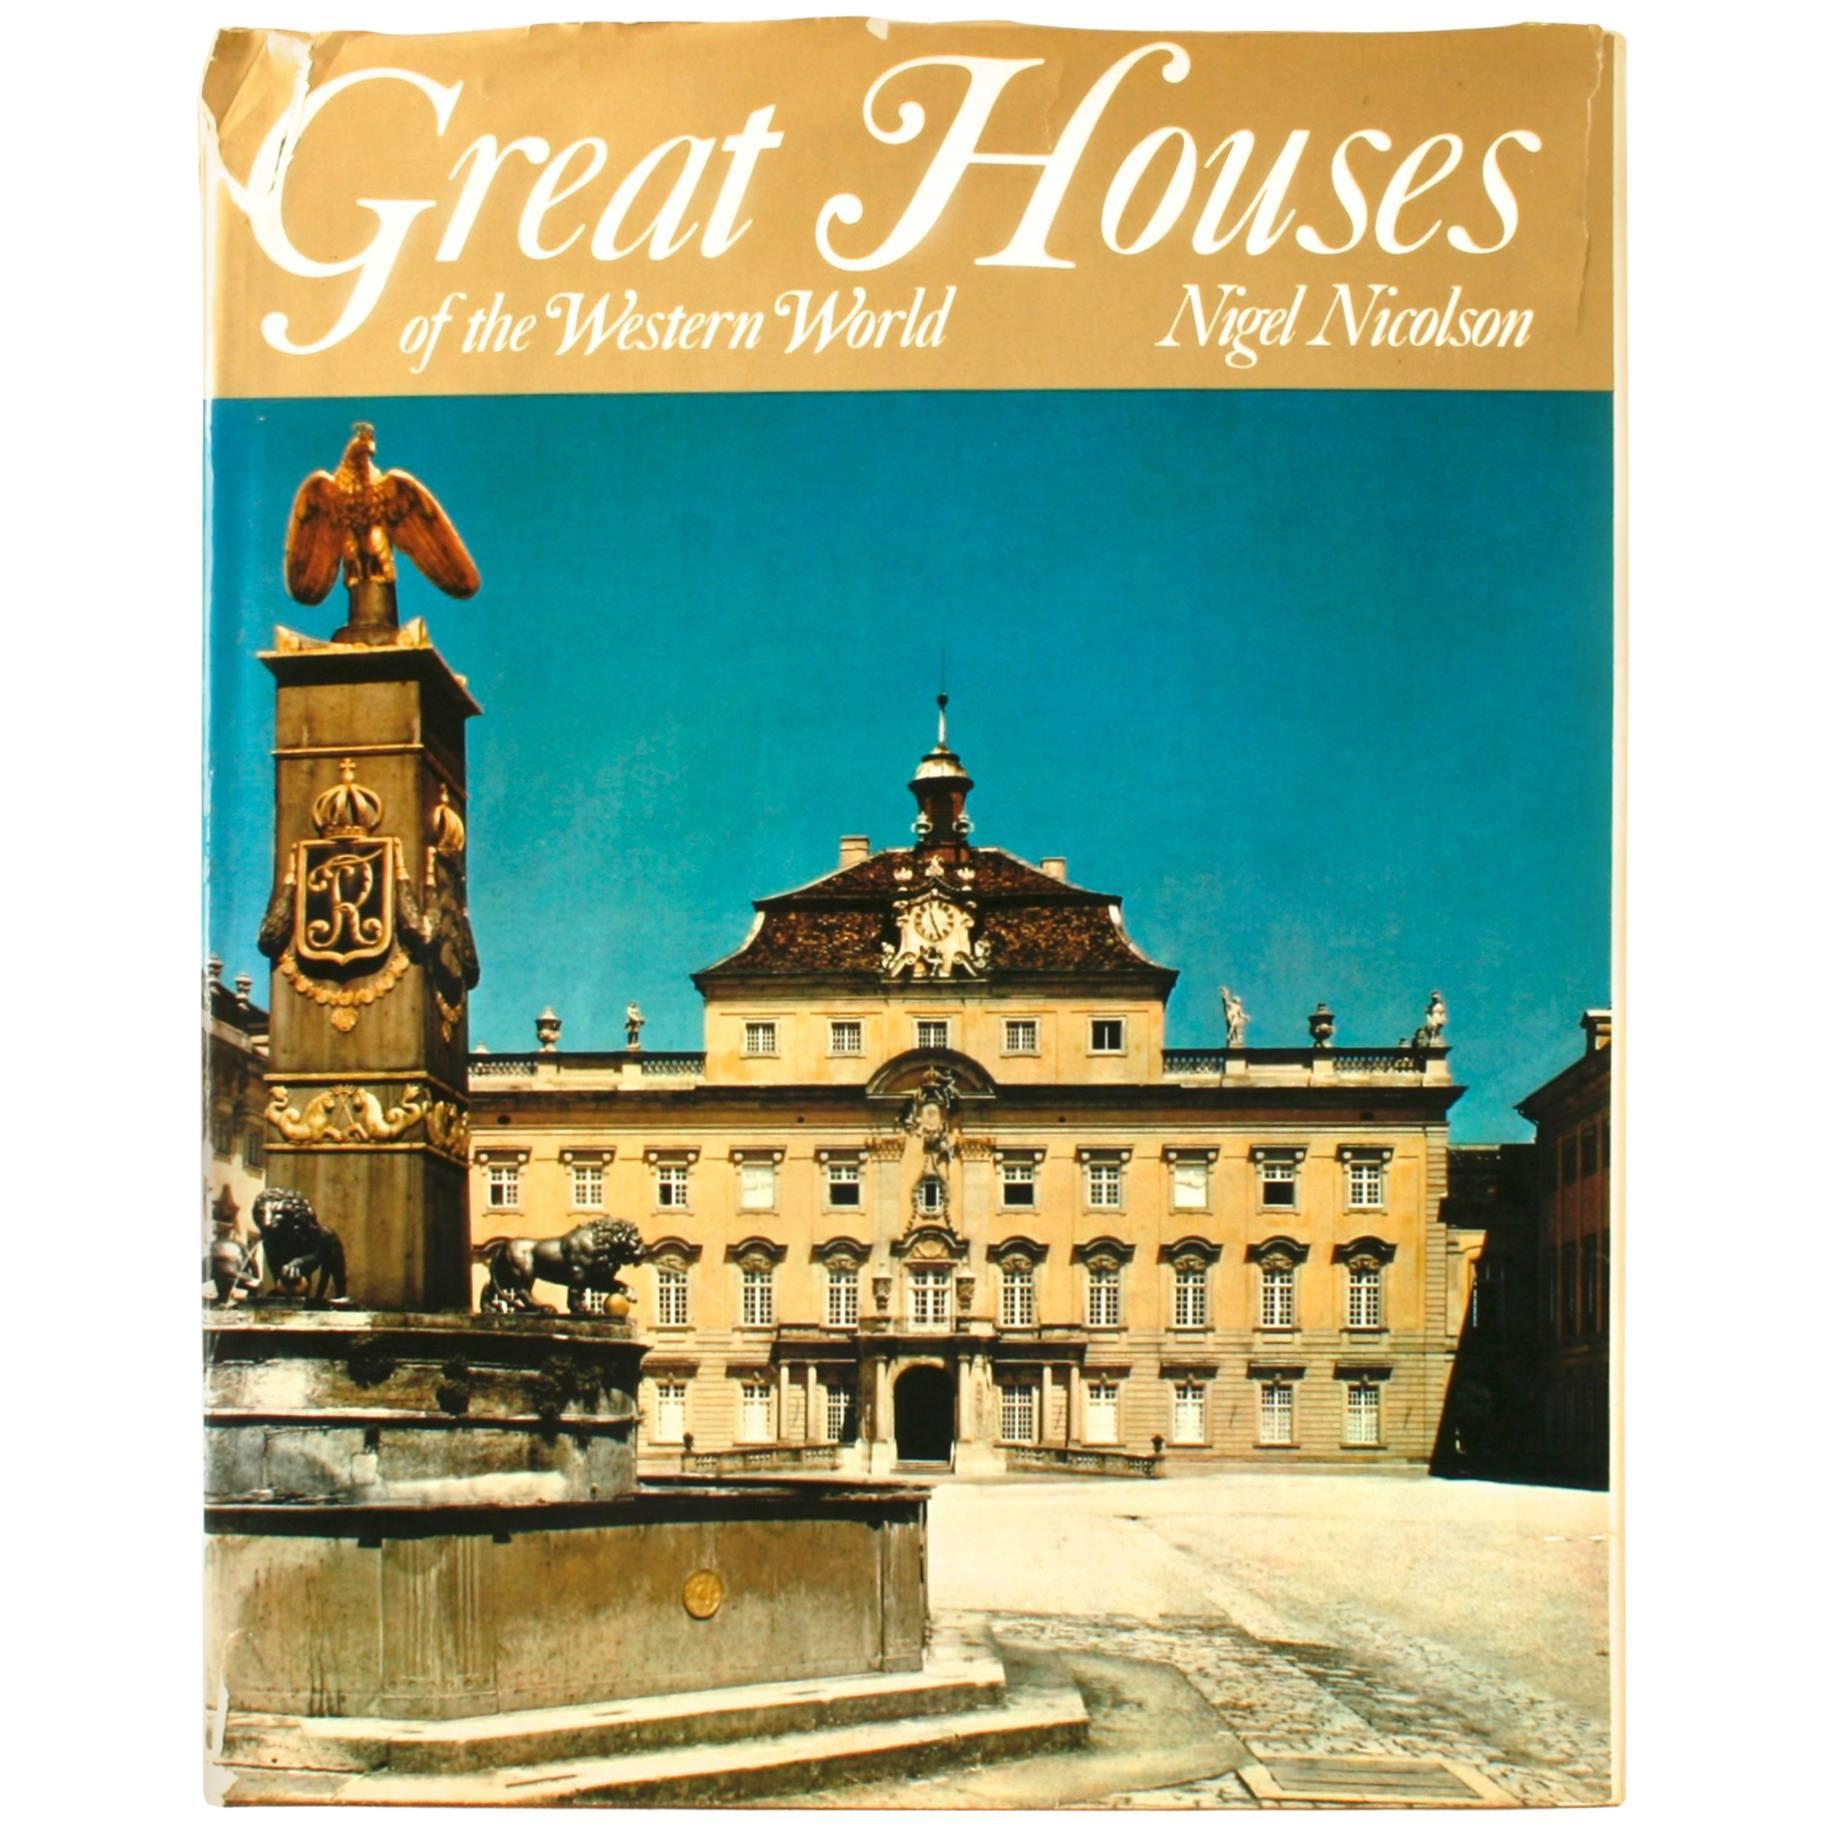 Great Houses of the Western World, First Edition